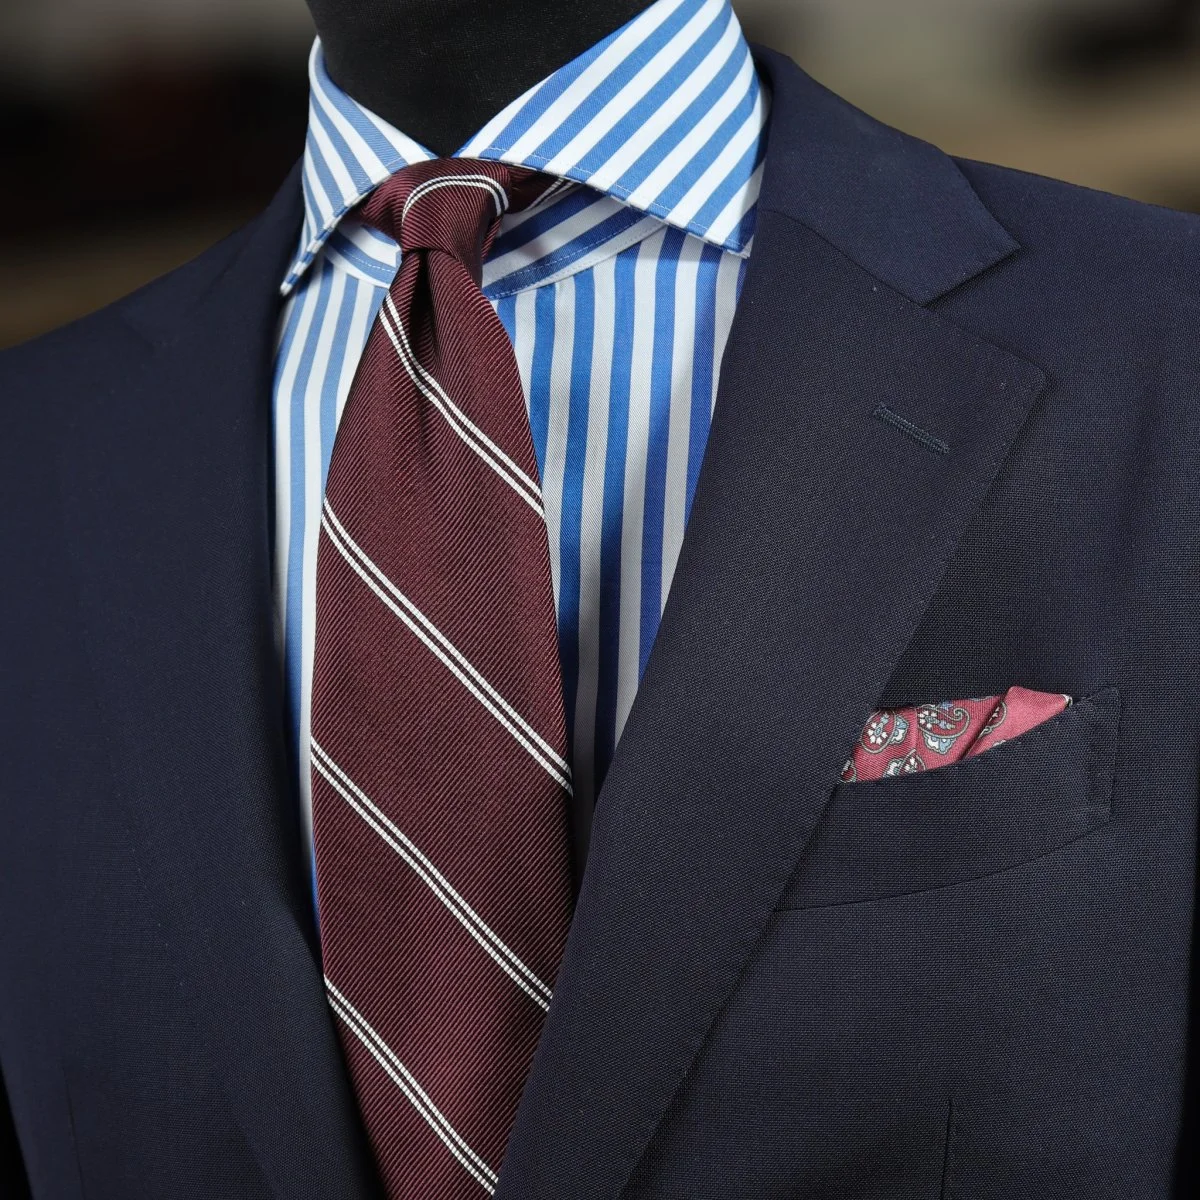 Blue suit, striped shirt and burgundy striped tie combination